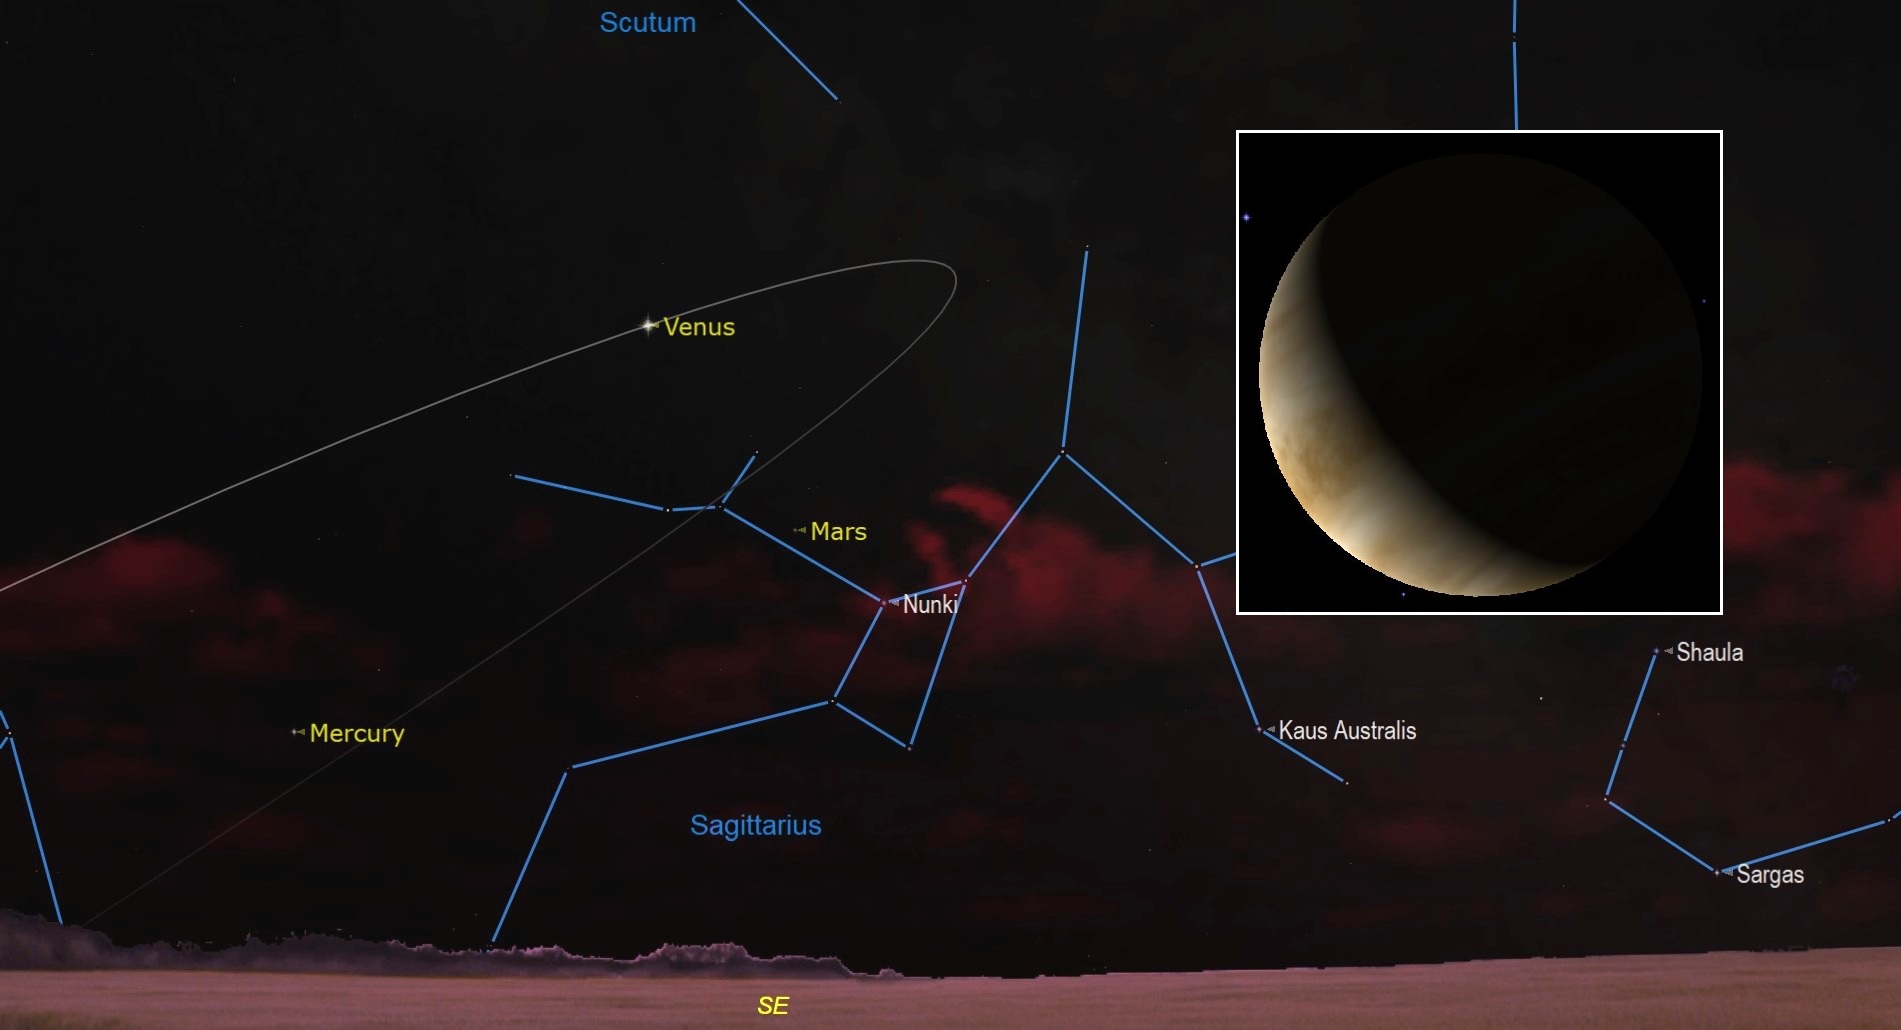 On Saturday, Feb. 12, Venus will reach its greatest illuminated extent for the current morning apparition. In a telescope, the planet will show a 26%-illuminated, waxing crescent phase and an apparent disk size of 41 arc-seconds.